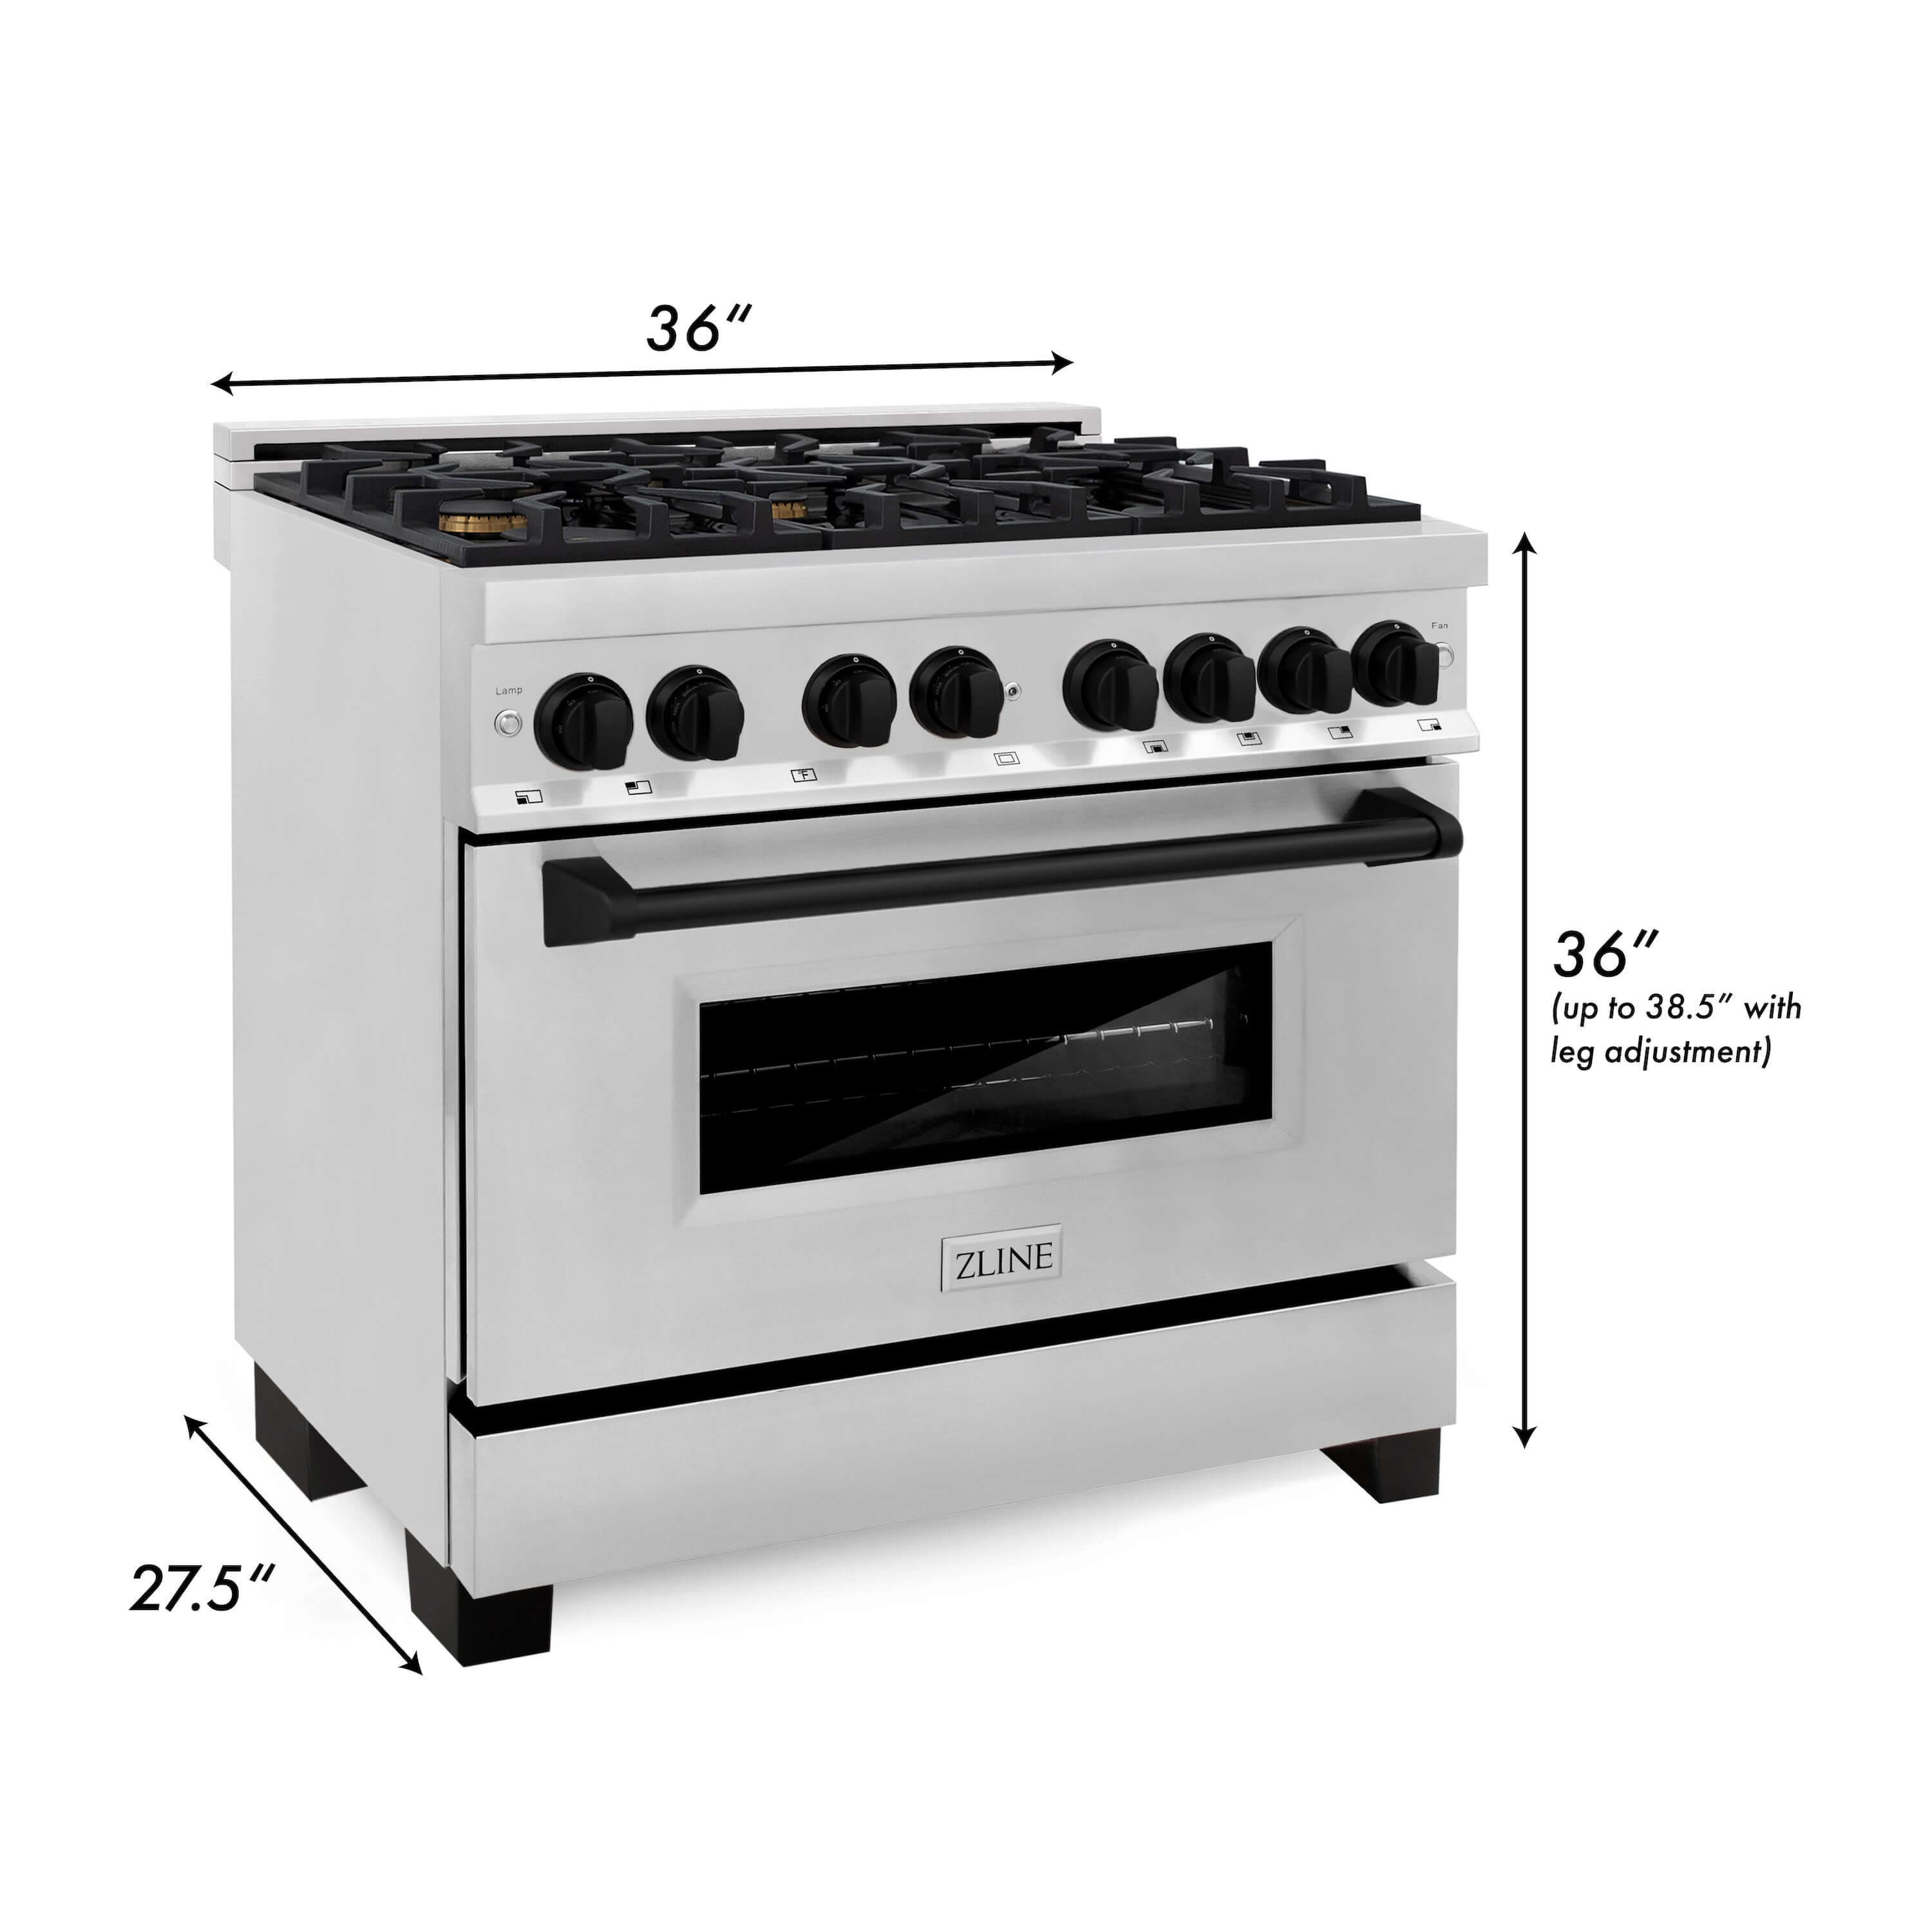 ZLINE Autograph Edition 36 in. Kitchen Package with Stainless Steel Dual Fuel Range, Range Hood, Dishwasher and Refrigeration Including External Water Dispenser with Matte Black Accents (4AKPR-RARHDWM36-MB) dimensional diagram with measurements.